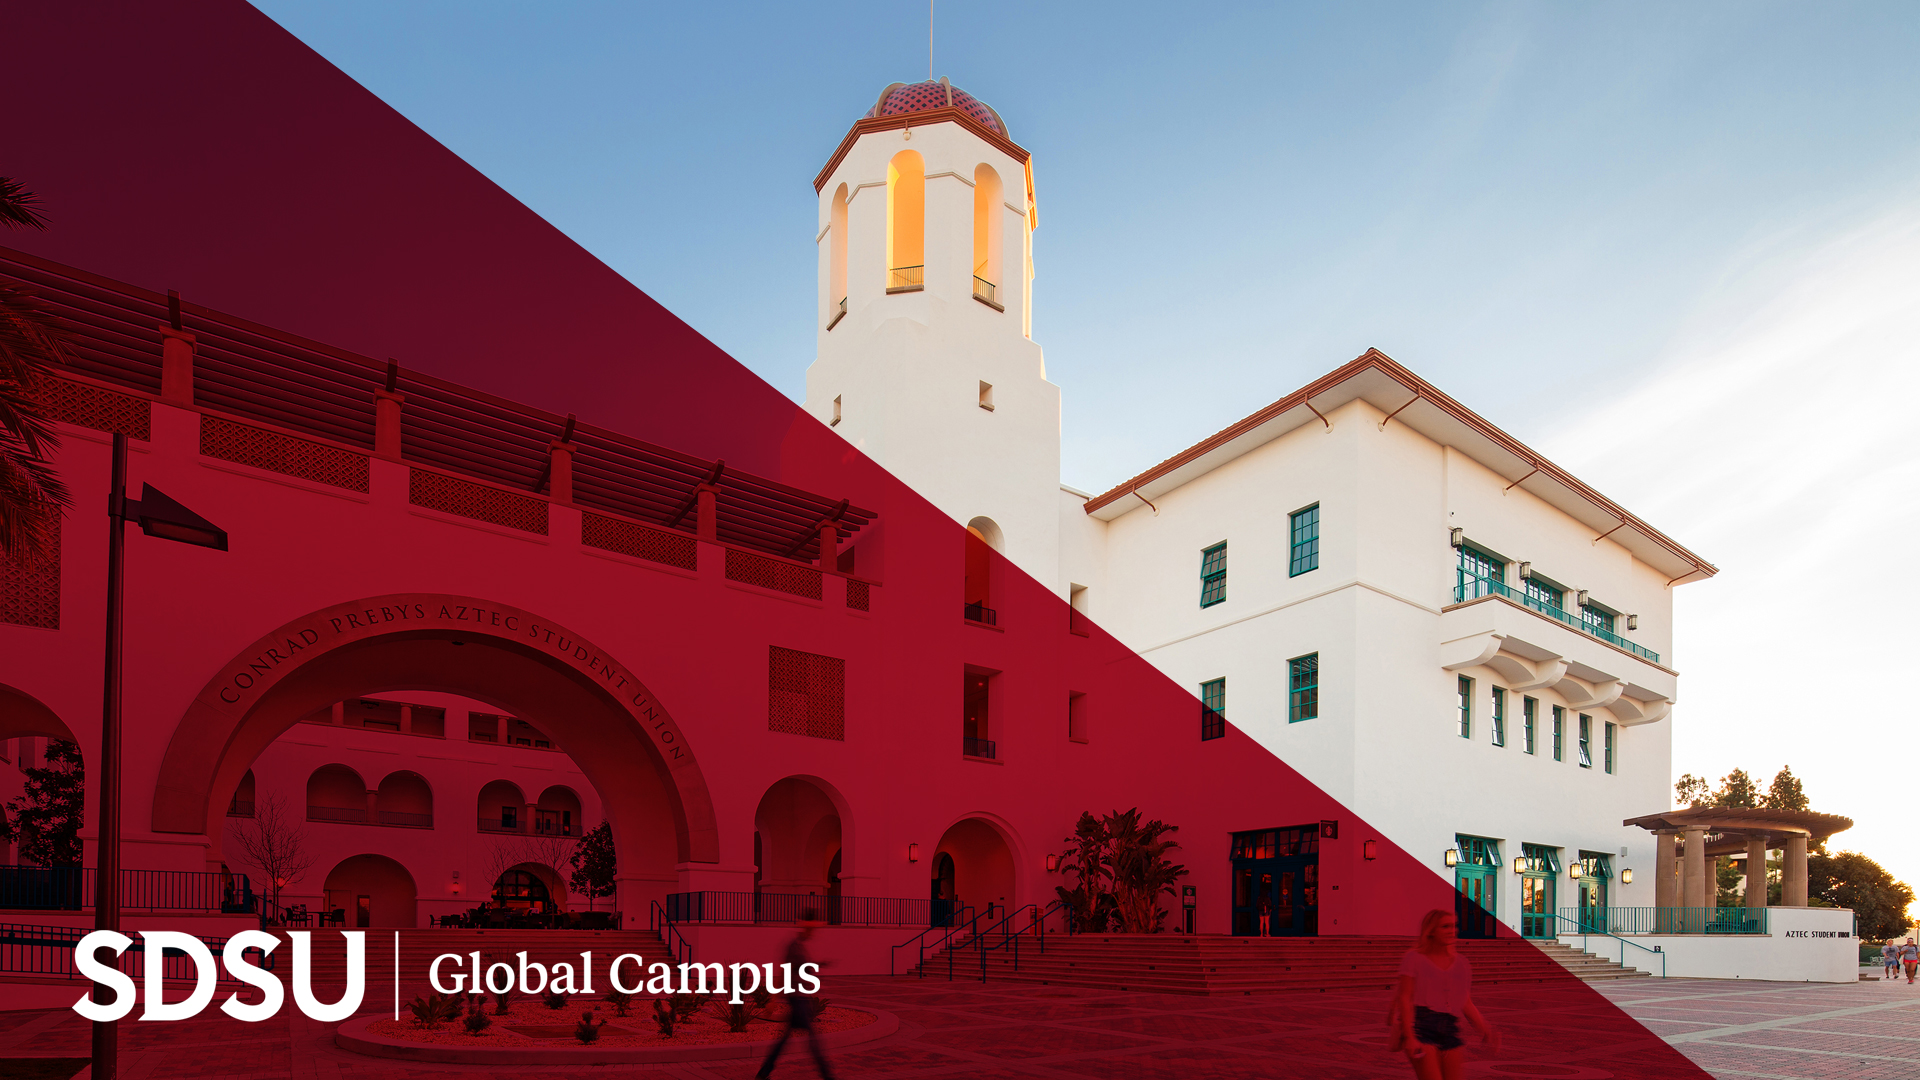 Zoom background with SDSU Global Campus branding